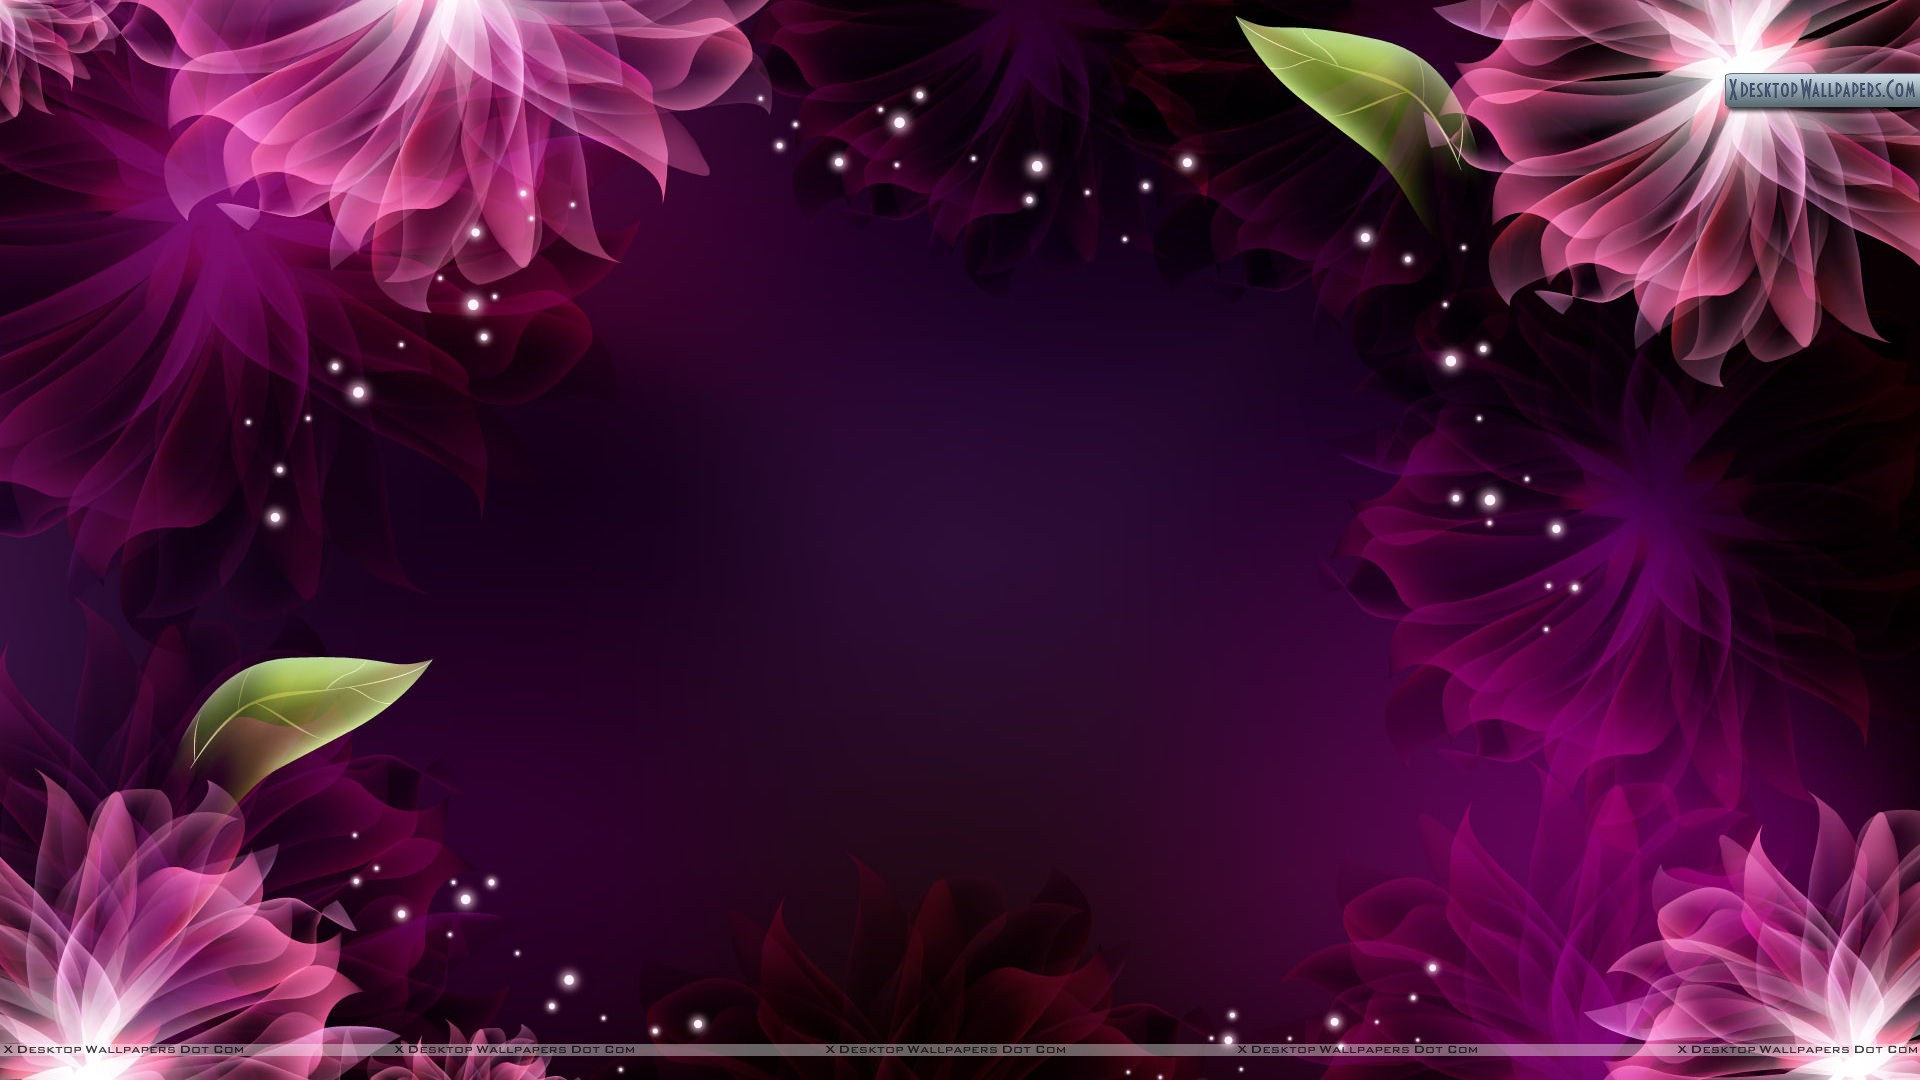 Free download Abstract Flower Backgrounds Hd Wallpaper Background HD Wallpapers [1920x1080] for